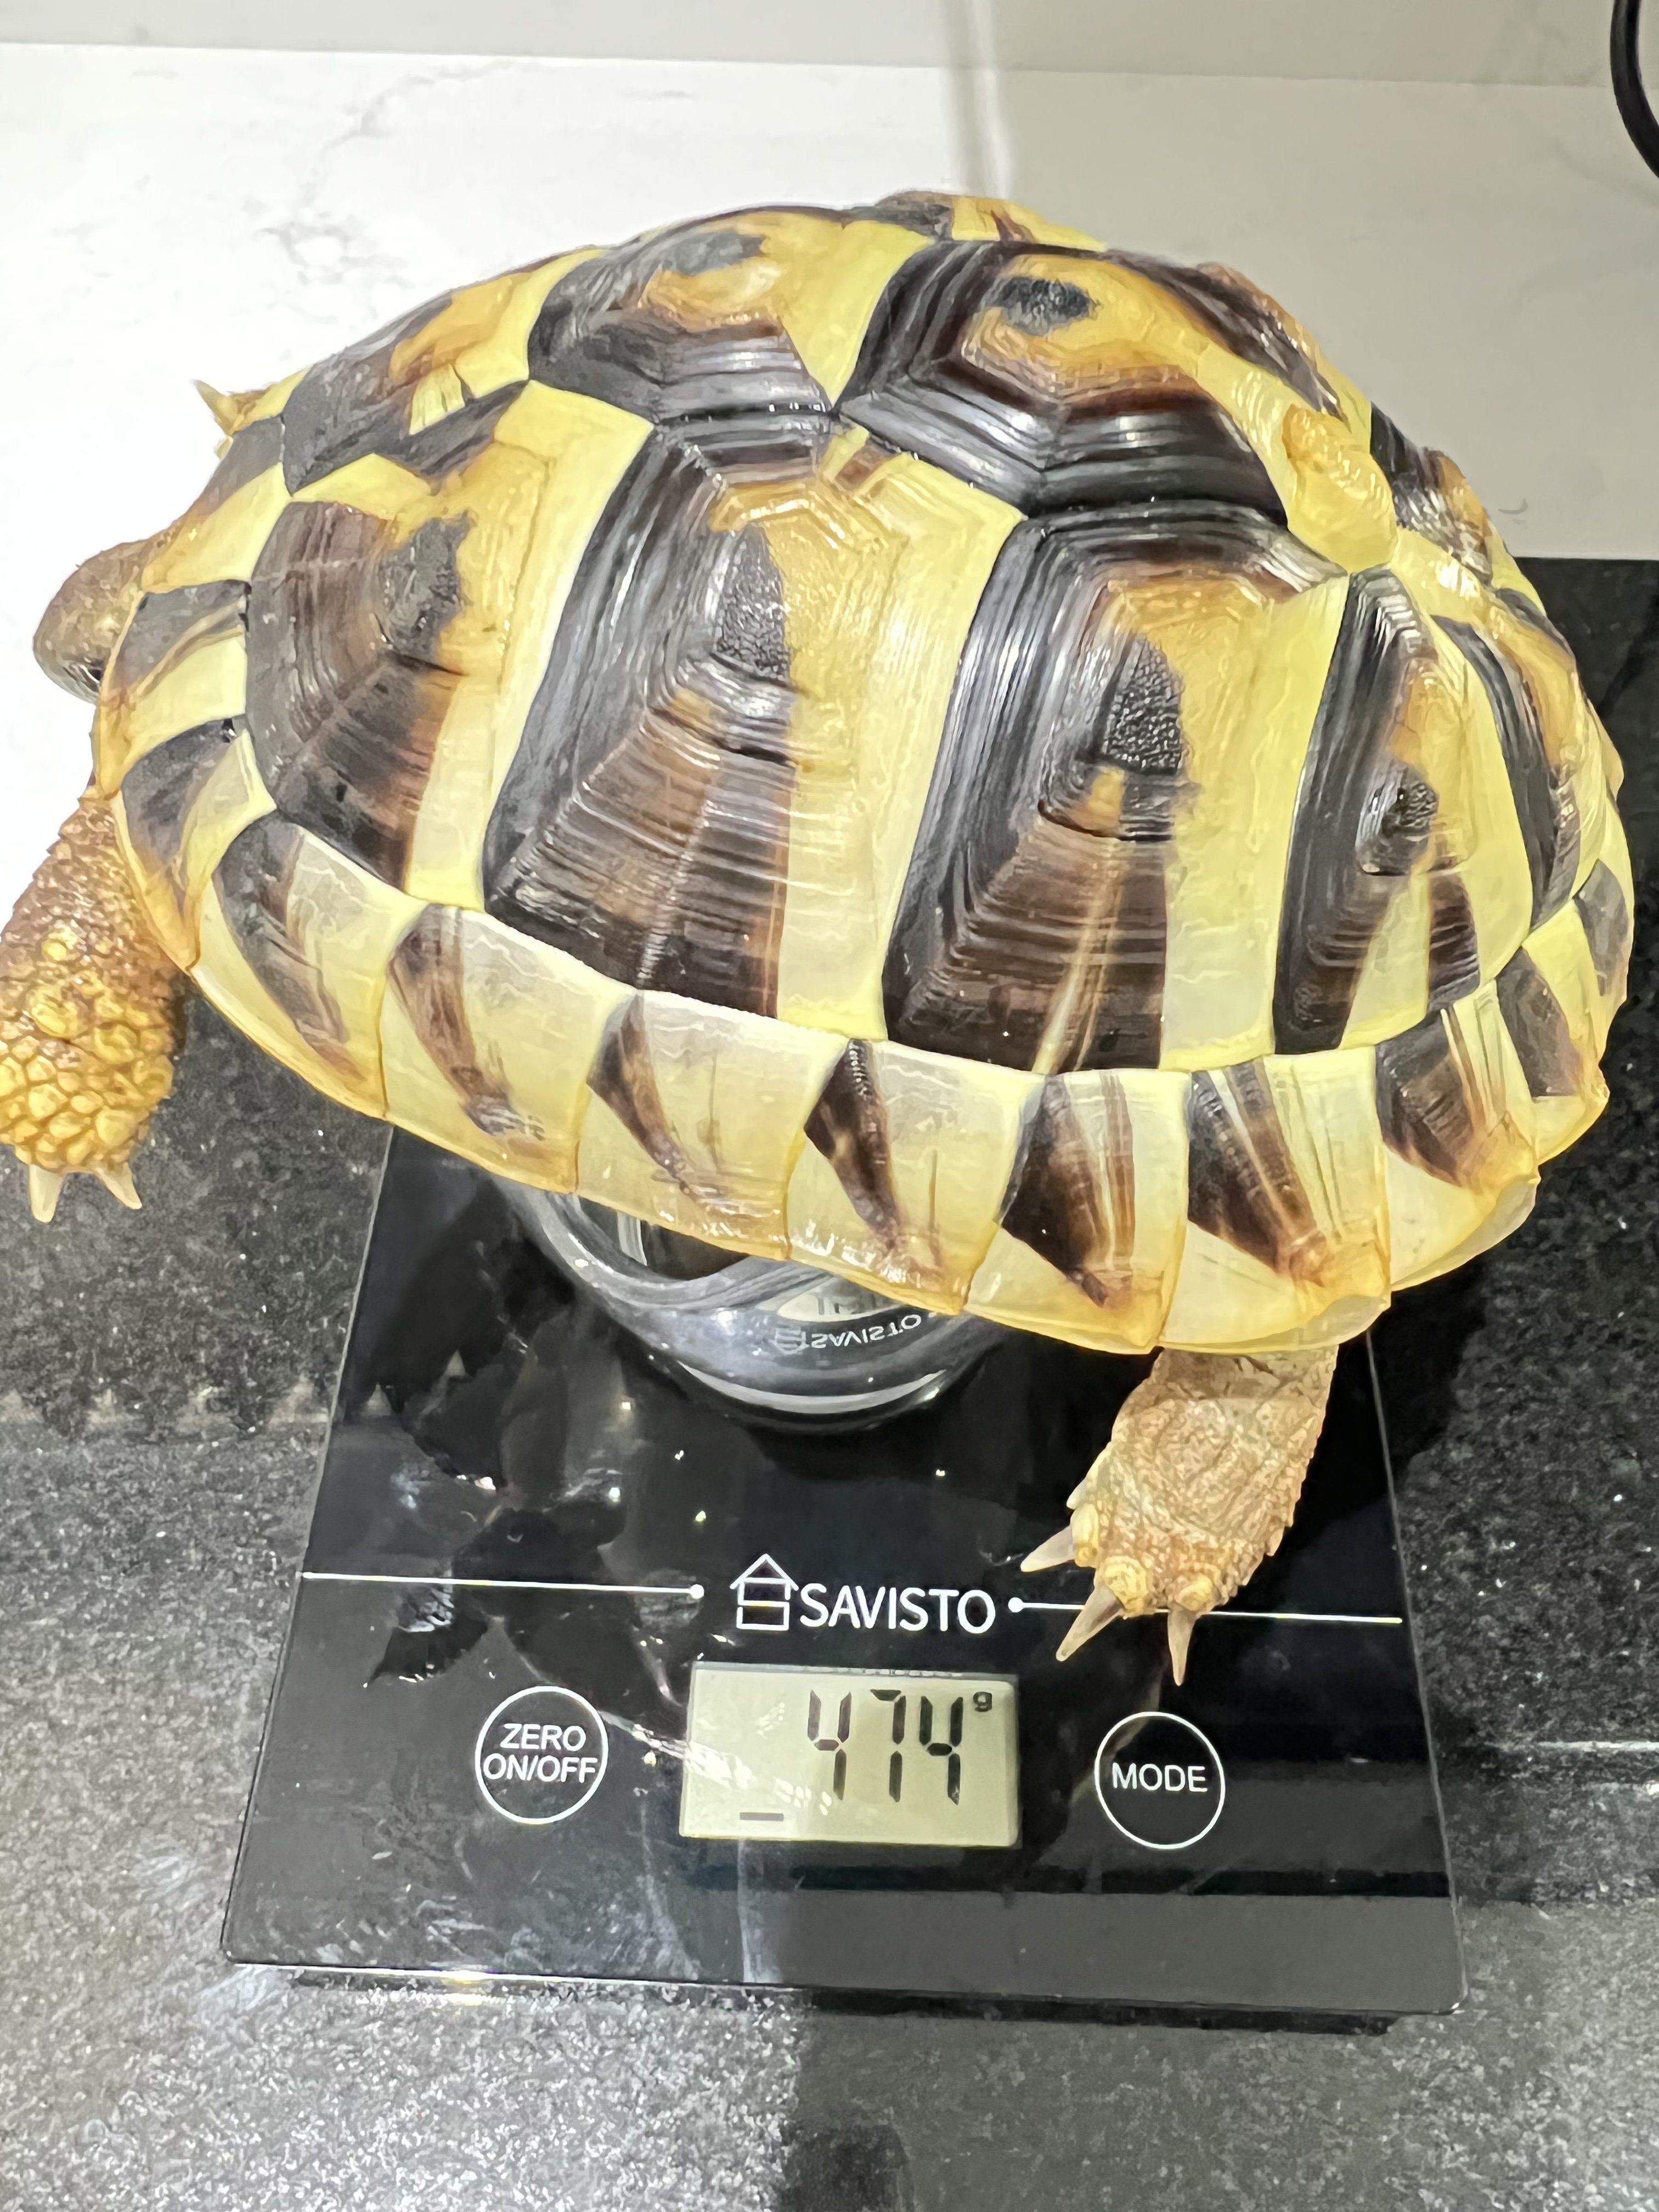 First weigh in of the month